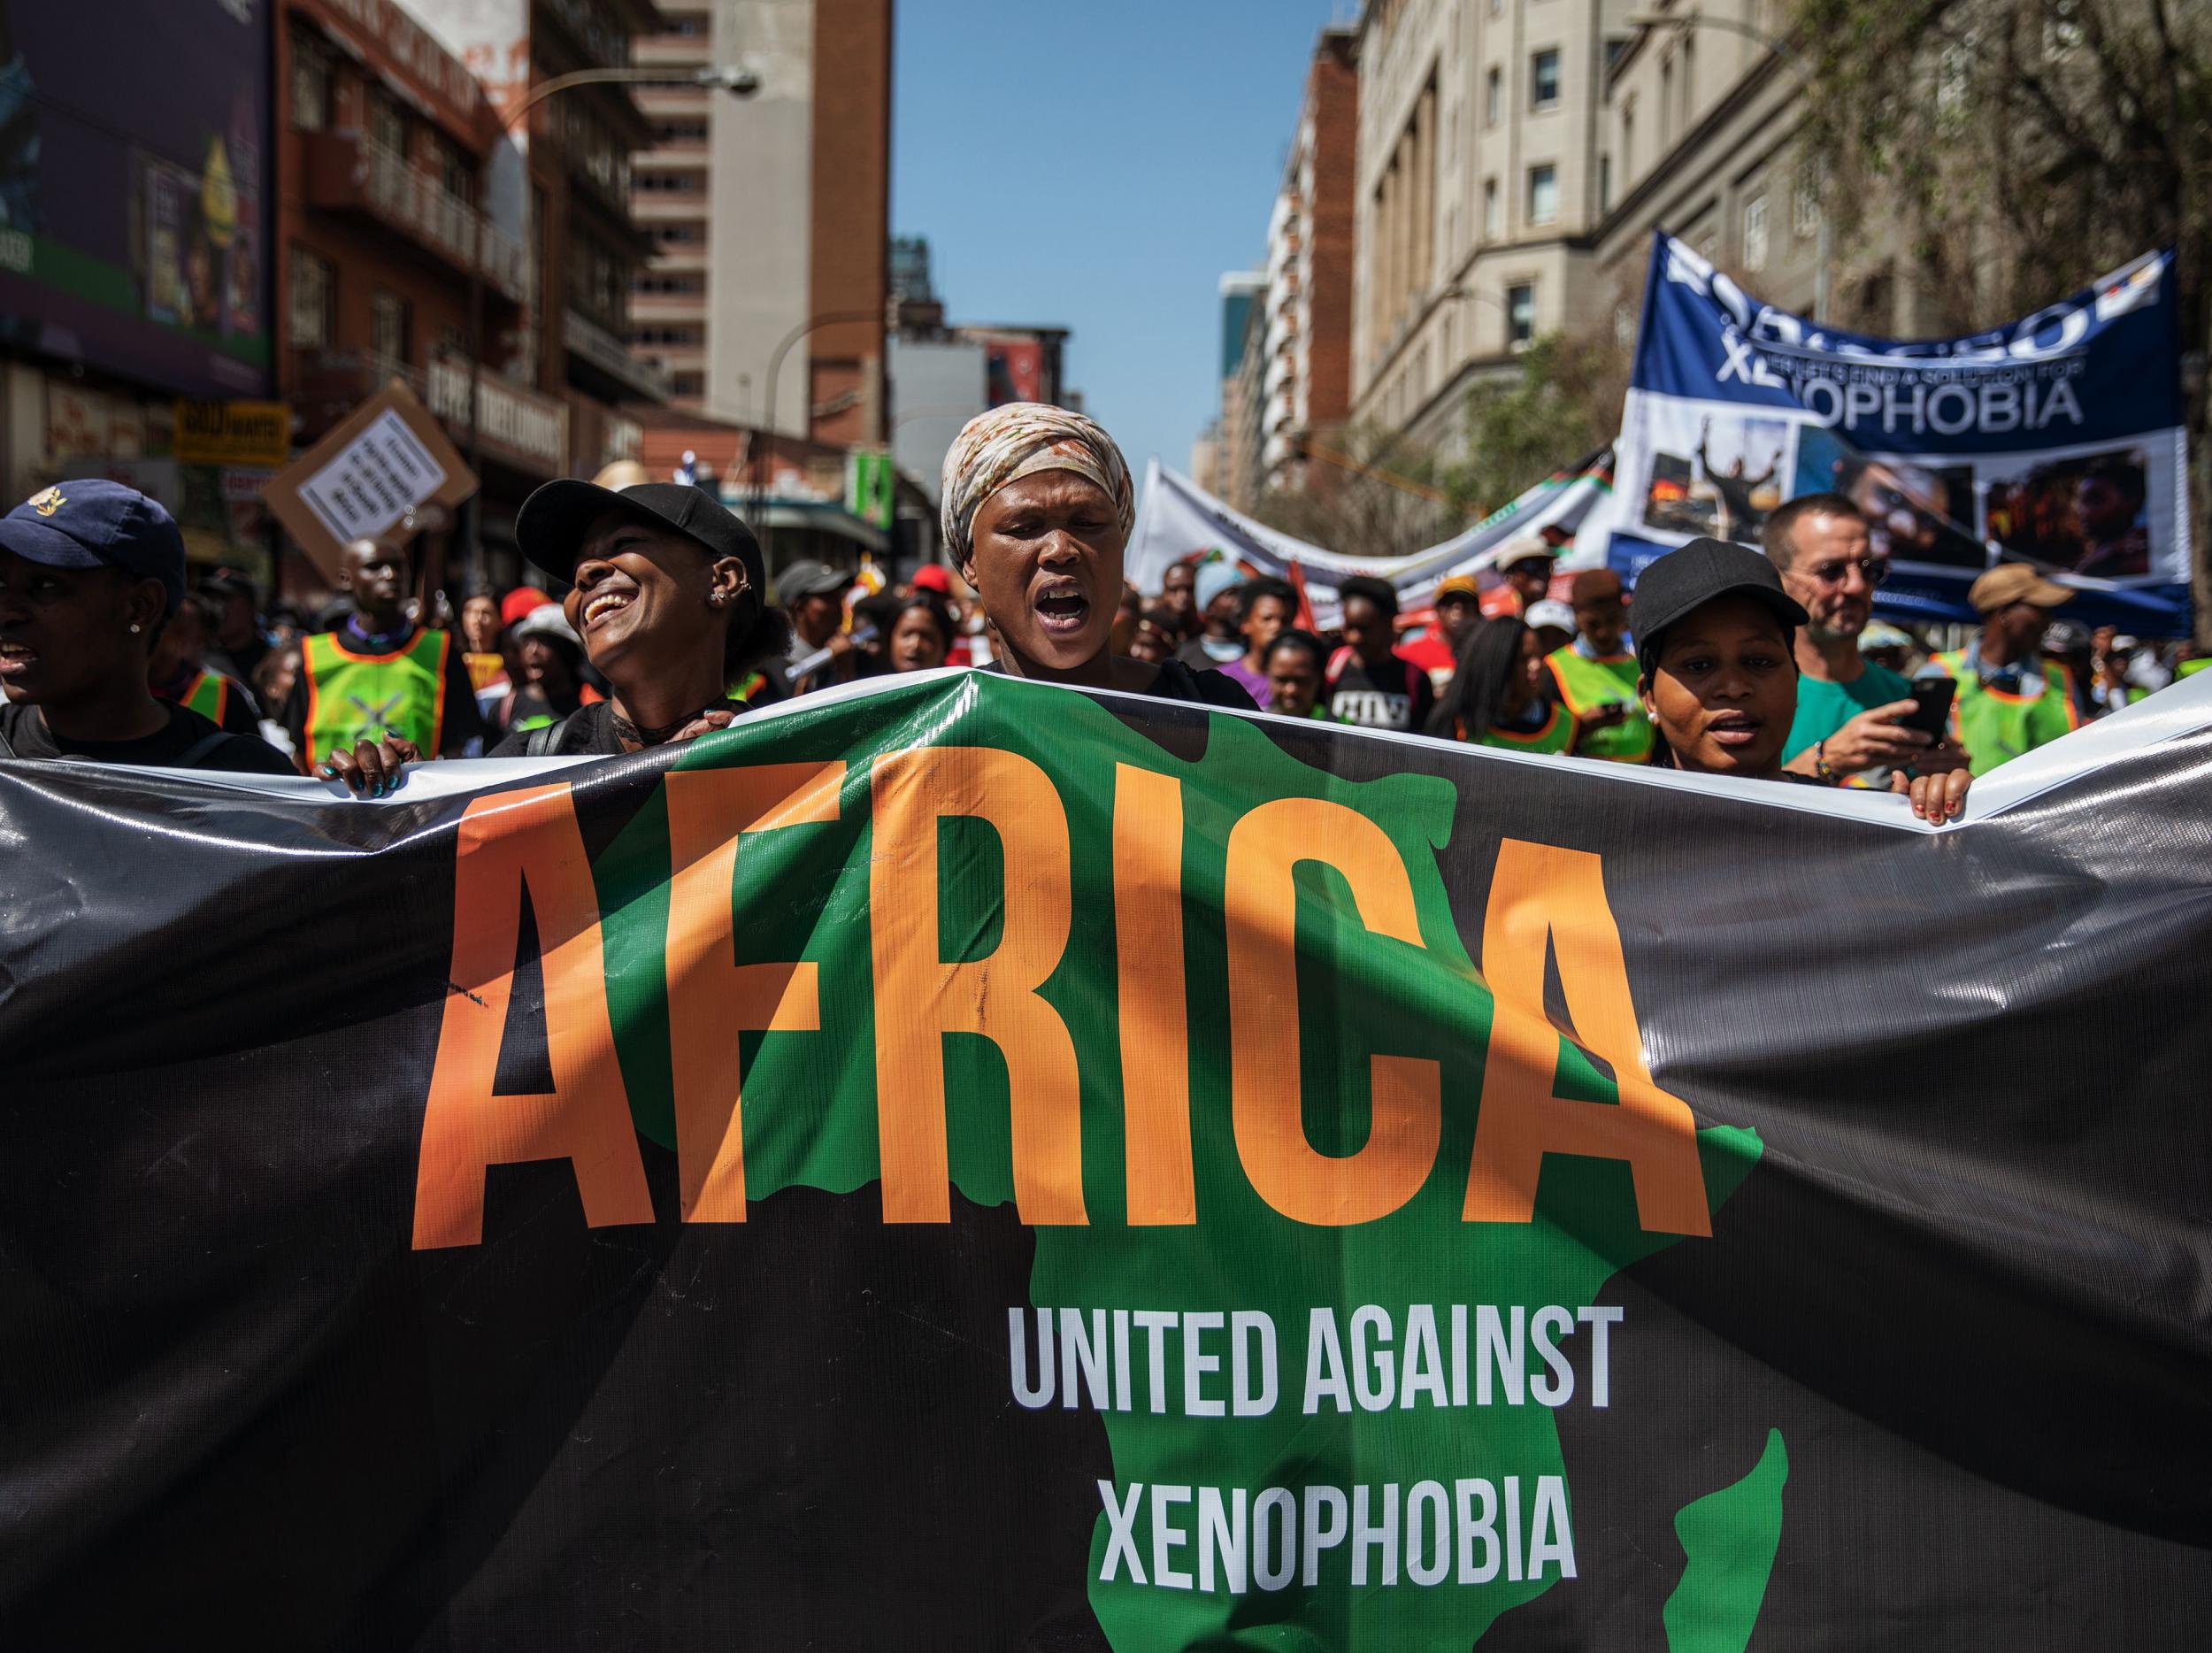 South Africa is a country actively reckoning with its past